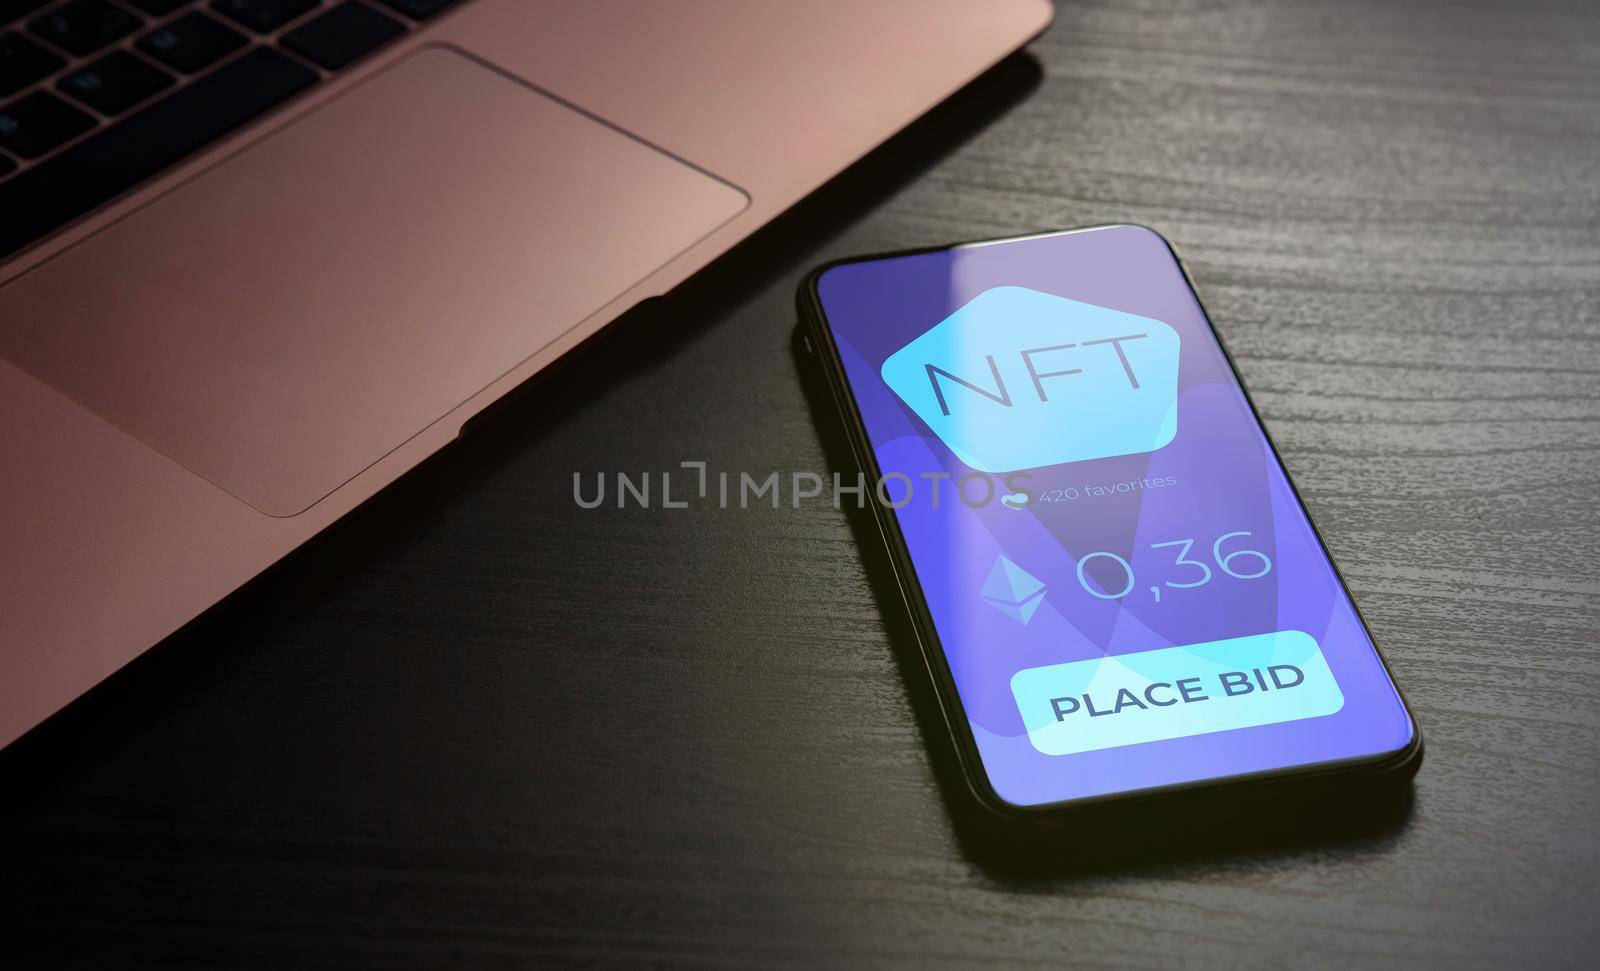 NFT marketplace based on blockchain technology concept. Online Shop with Unique Non-fungible tokens on the screen of a smartphone lying on a wooden table in front of a laptop. Focus on device screen by bestforbest